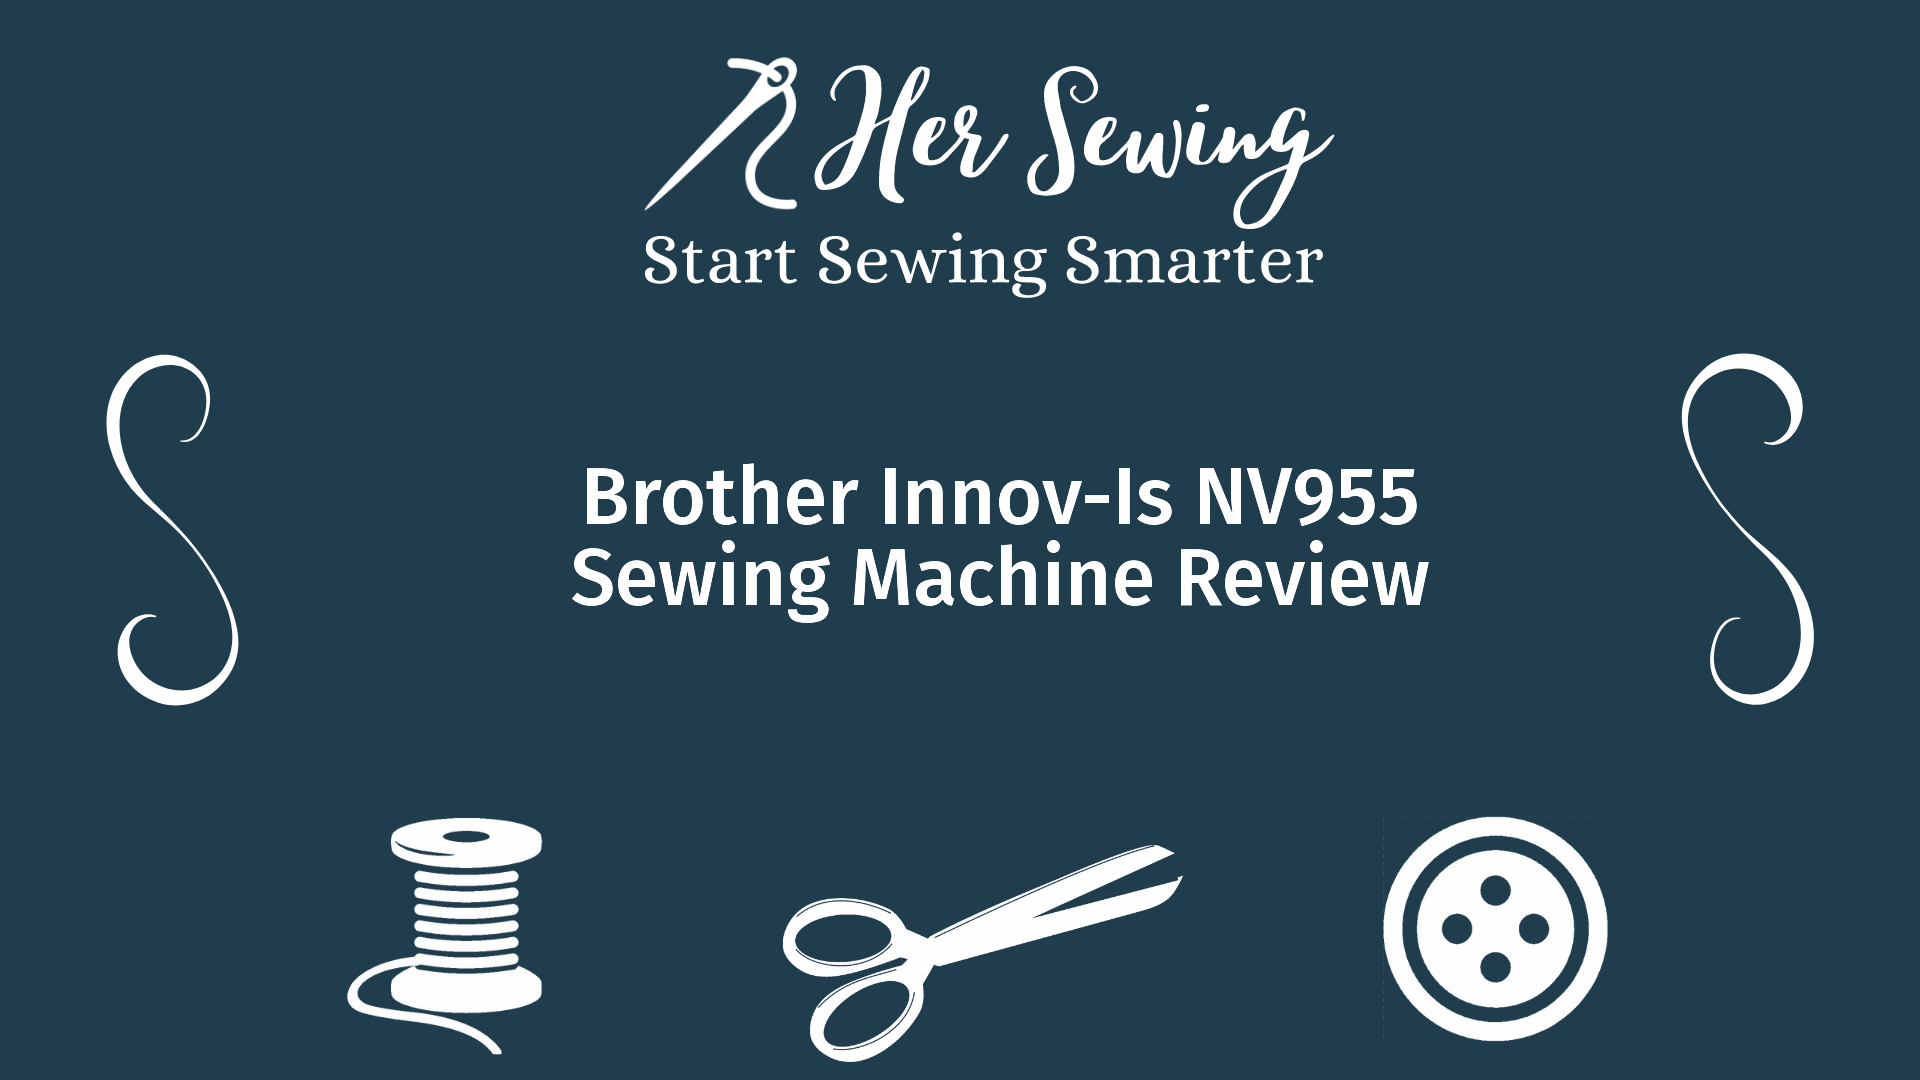 Brother Innov-Is NV955 Sewing Machine Review